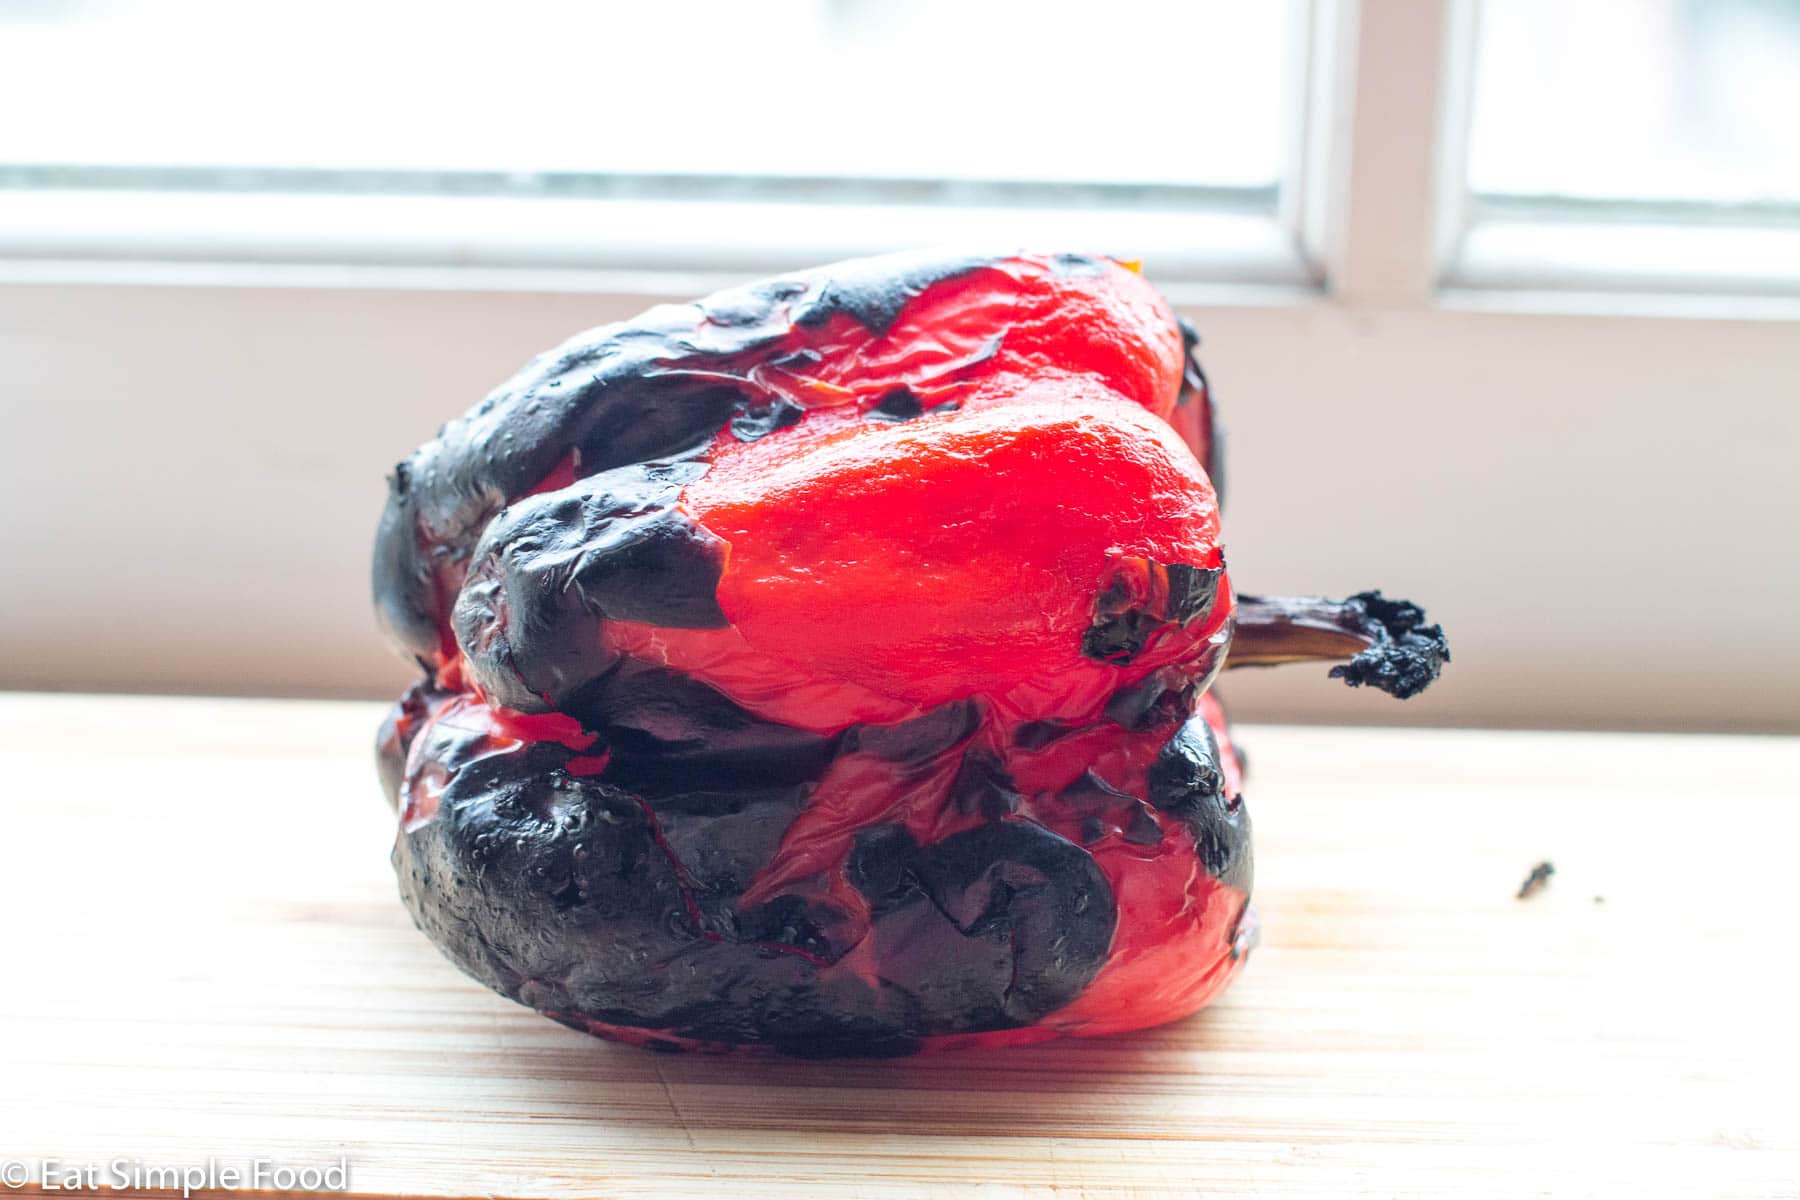 Roasted black Red Pepper sitting on a wood cutting board by a window.